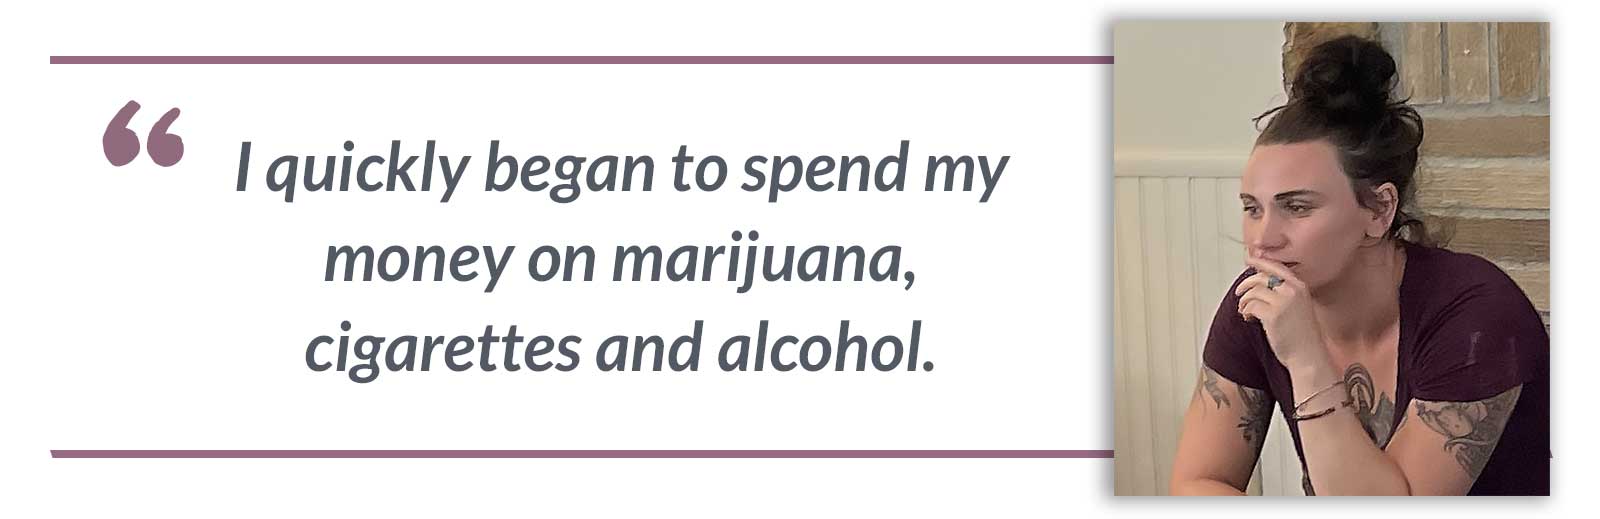 I quickly began to spend my money on marijuana, cigarettes and alcohol.-Alison